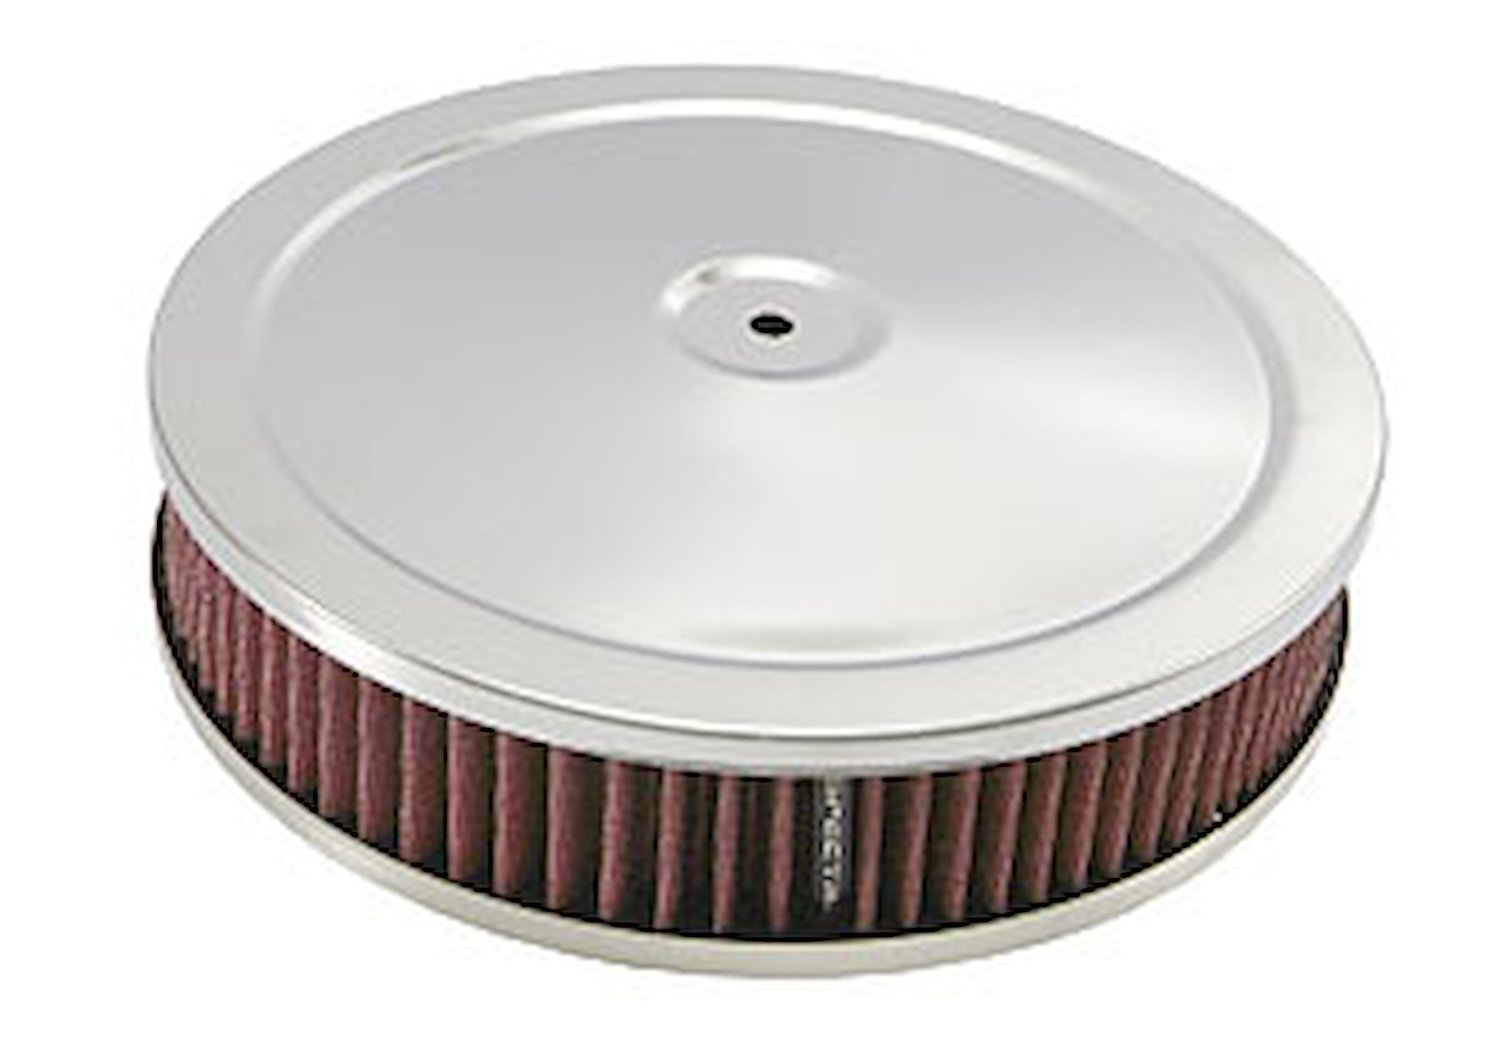 Round Air Cleaner Chrome Plated Steel